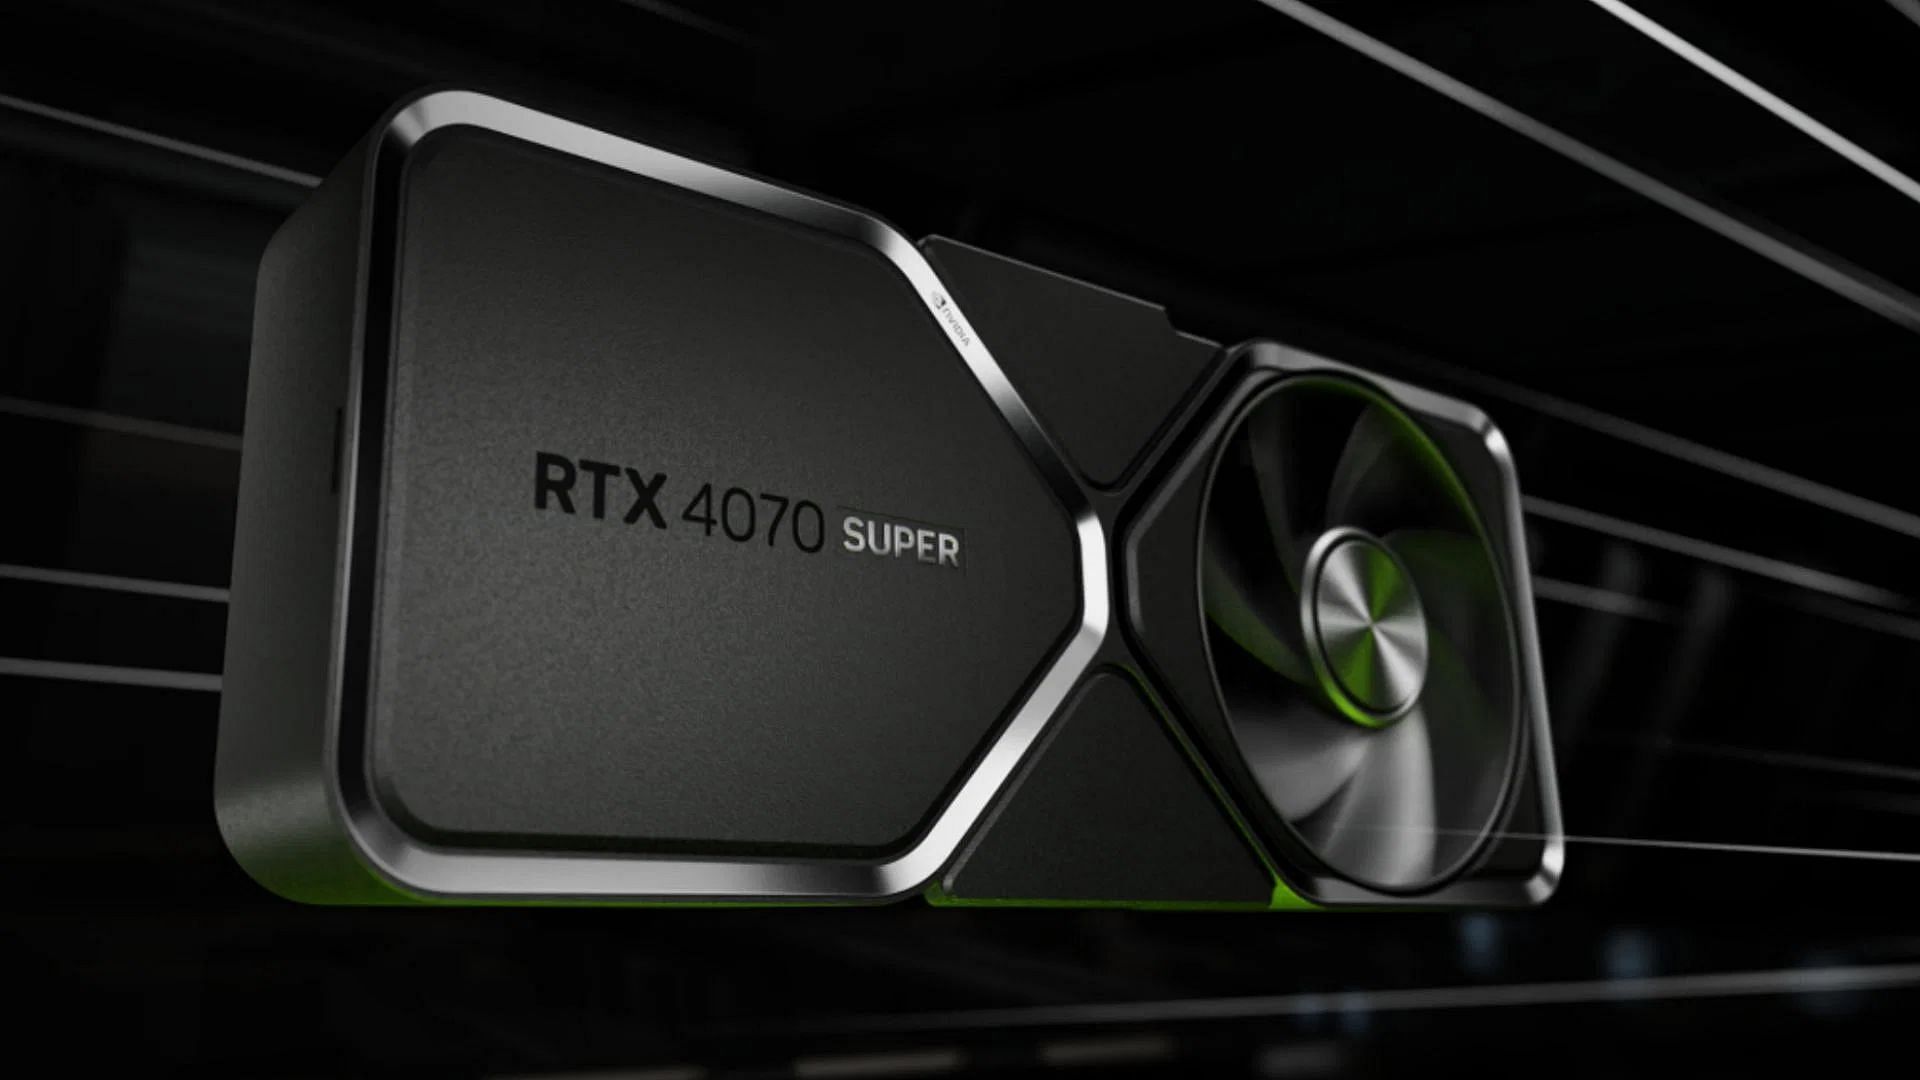 The RTX 4070 Super brings extra performance at the same $600 price tag (Image via Nvidia)